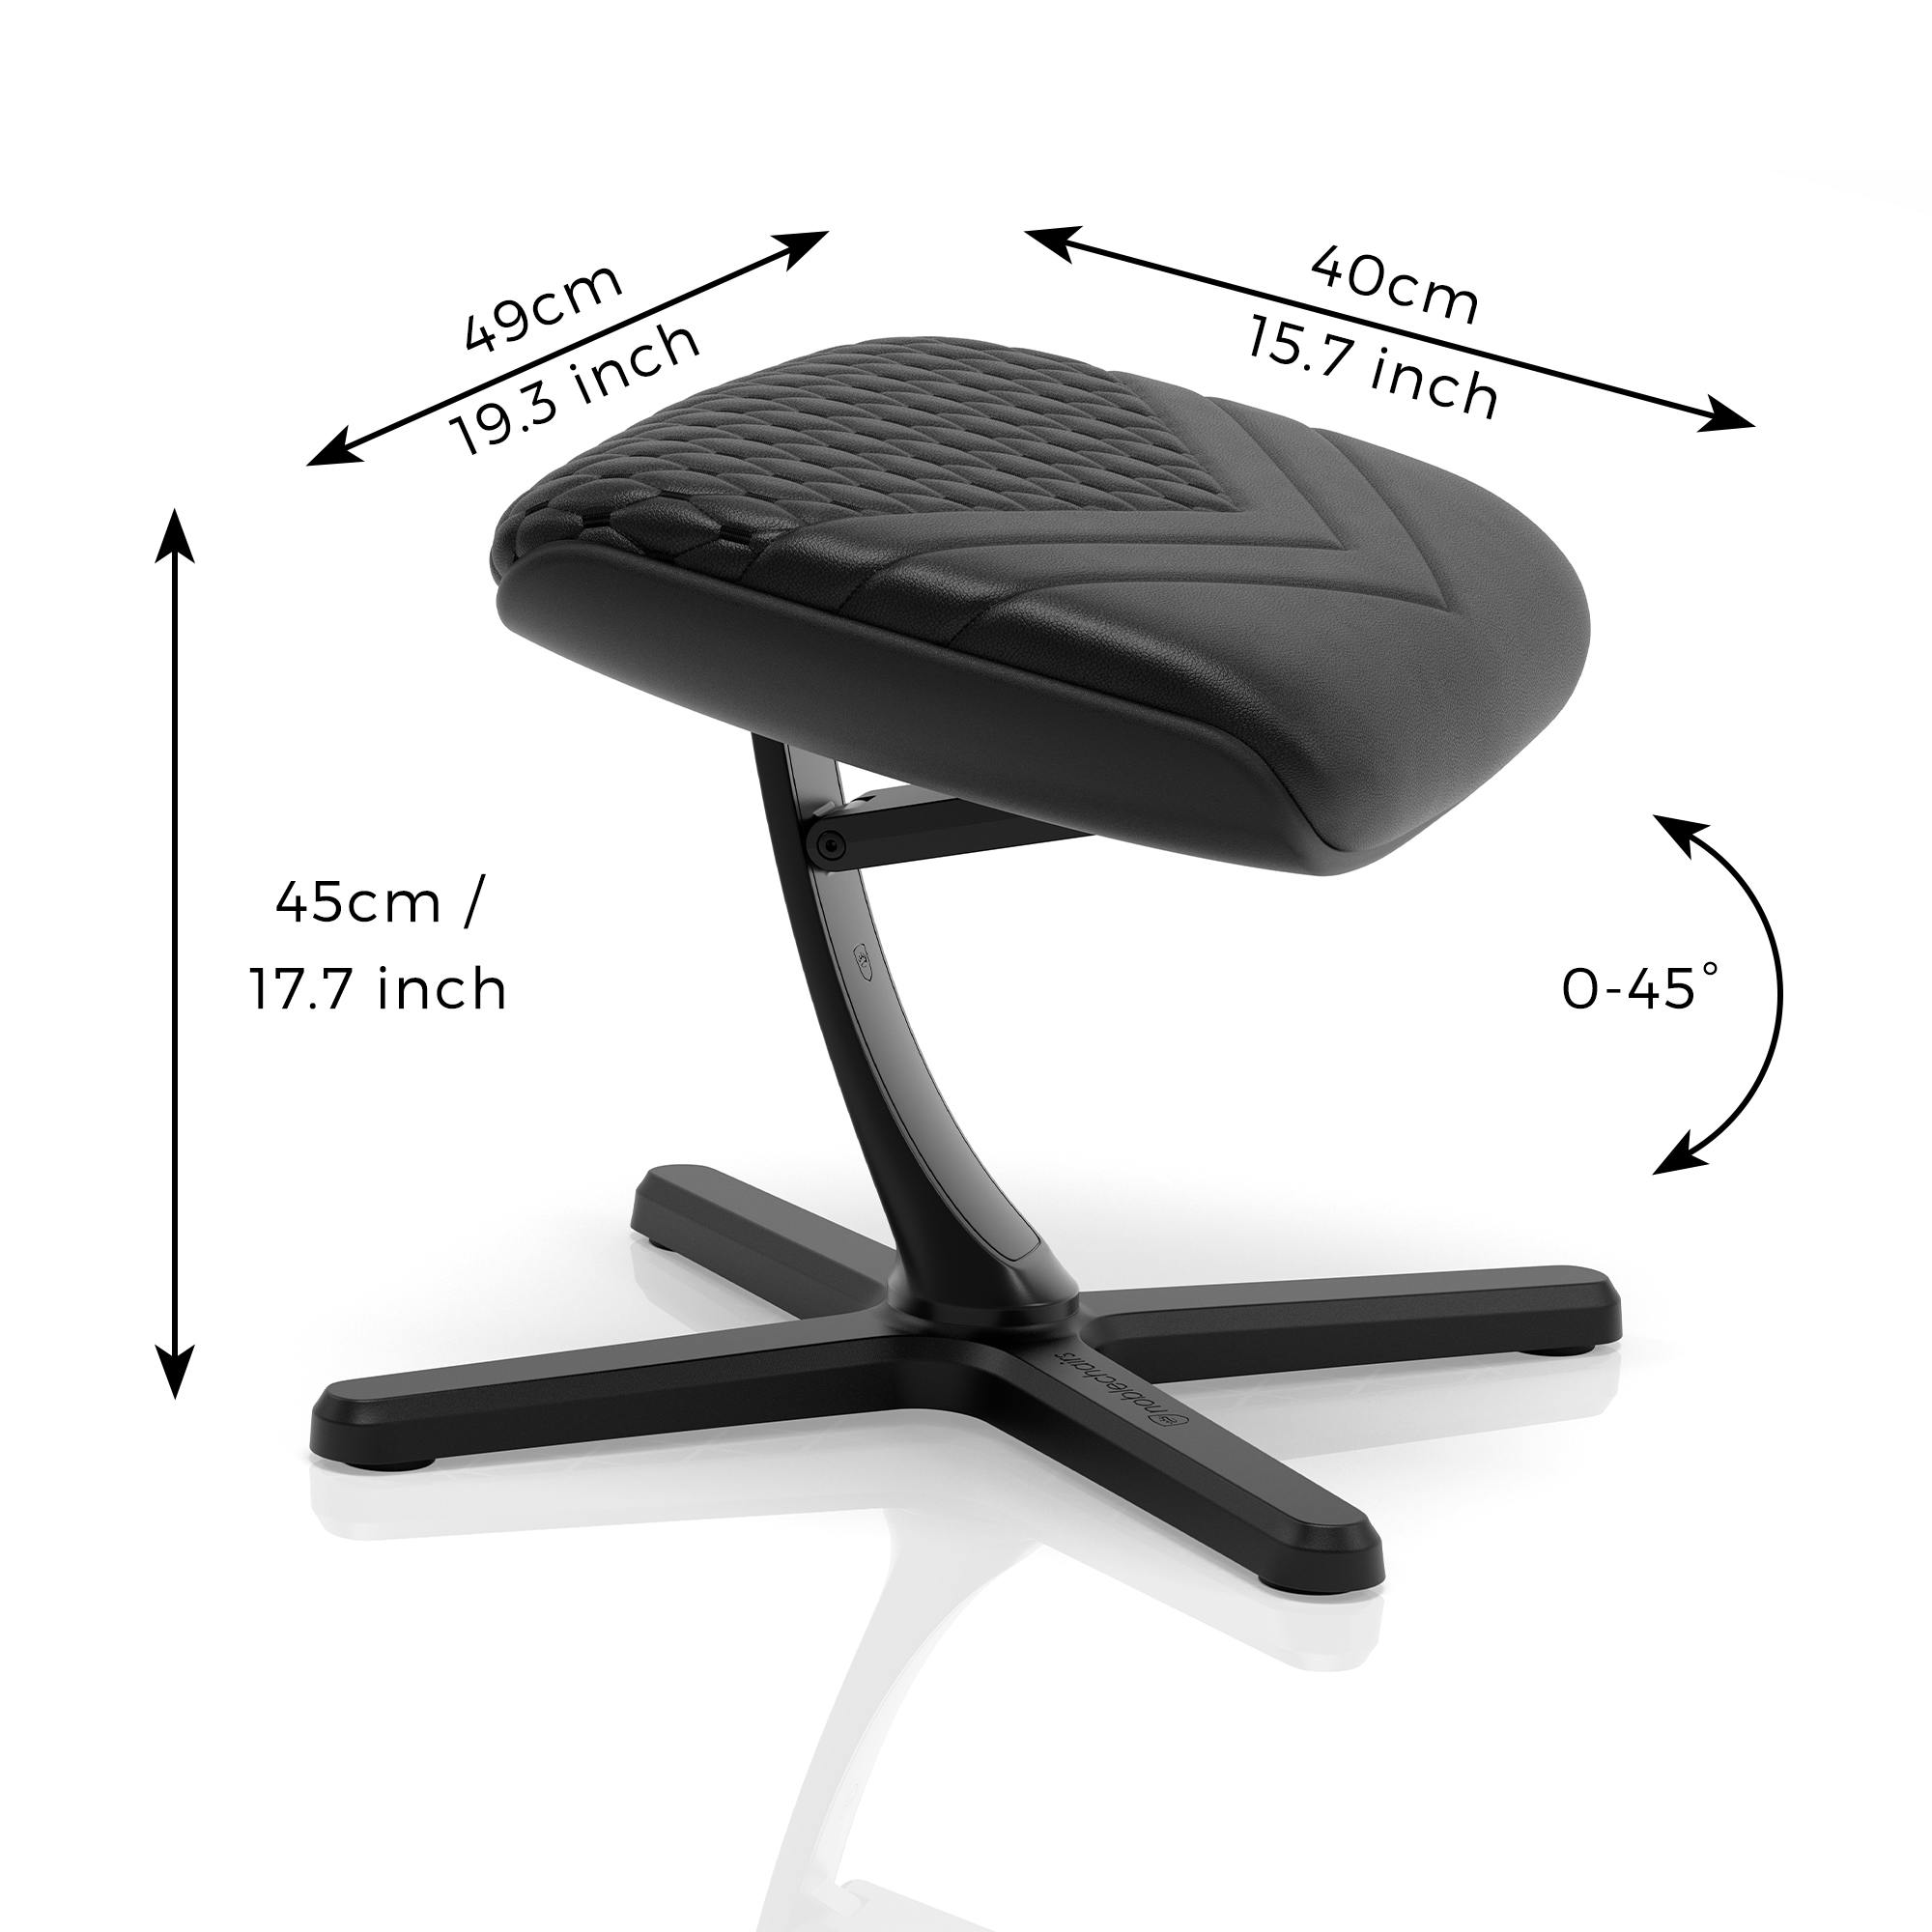 noblechairs - Footrest 2 - Real Leather Black